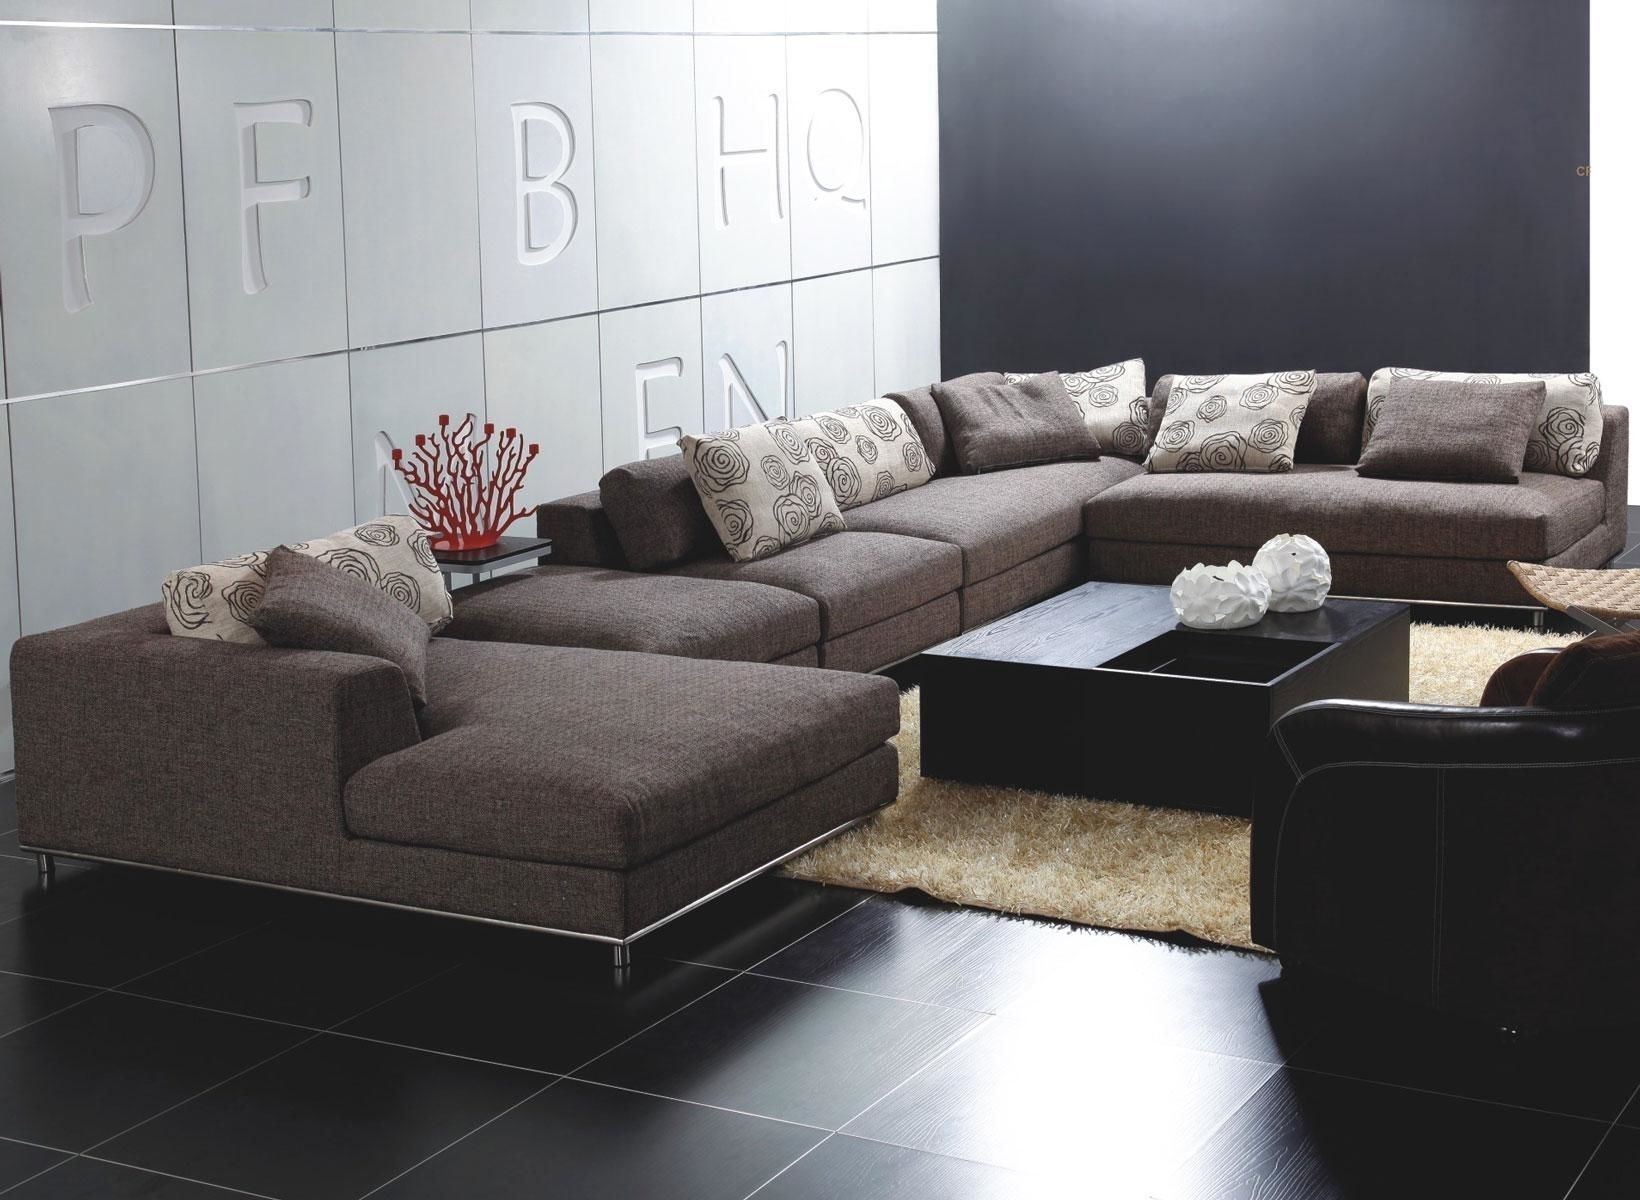 Brilliant Sectional Sofas Austin Tx – Buildsimplehome For Austin Sectional Sofas (View 10 of 10)